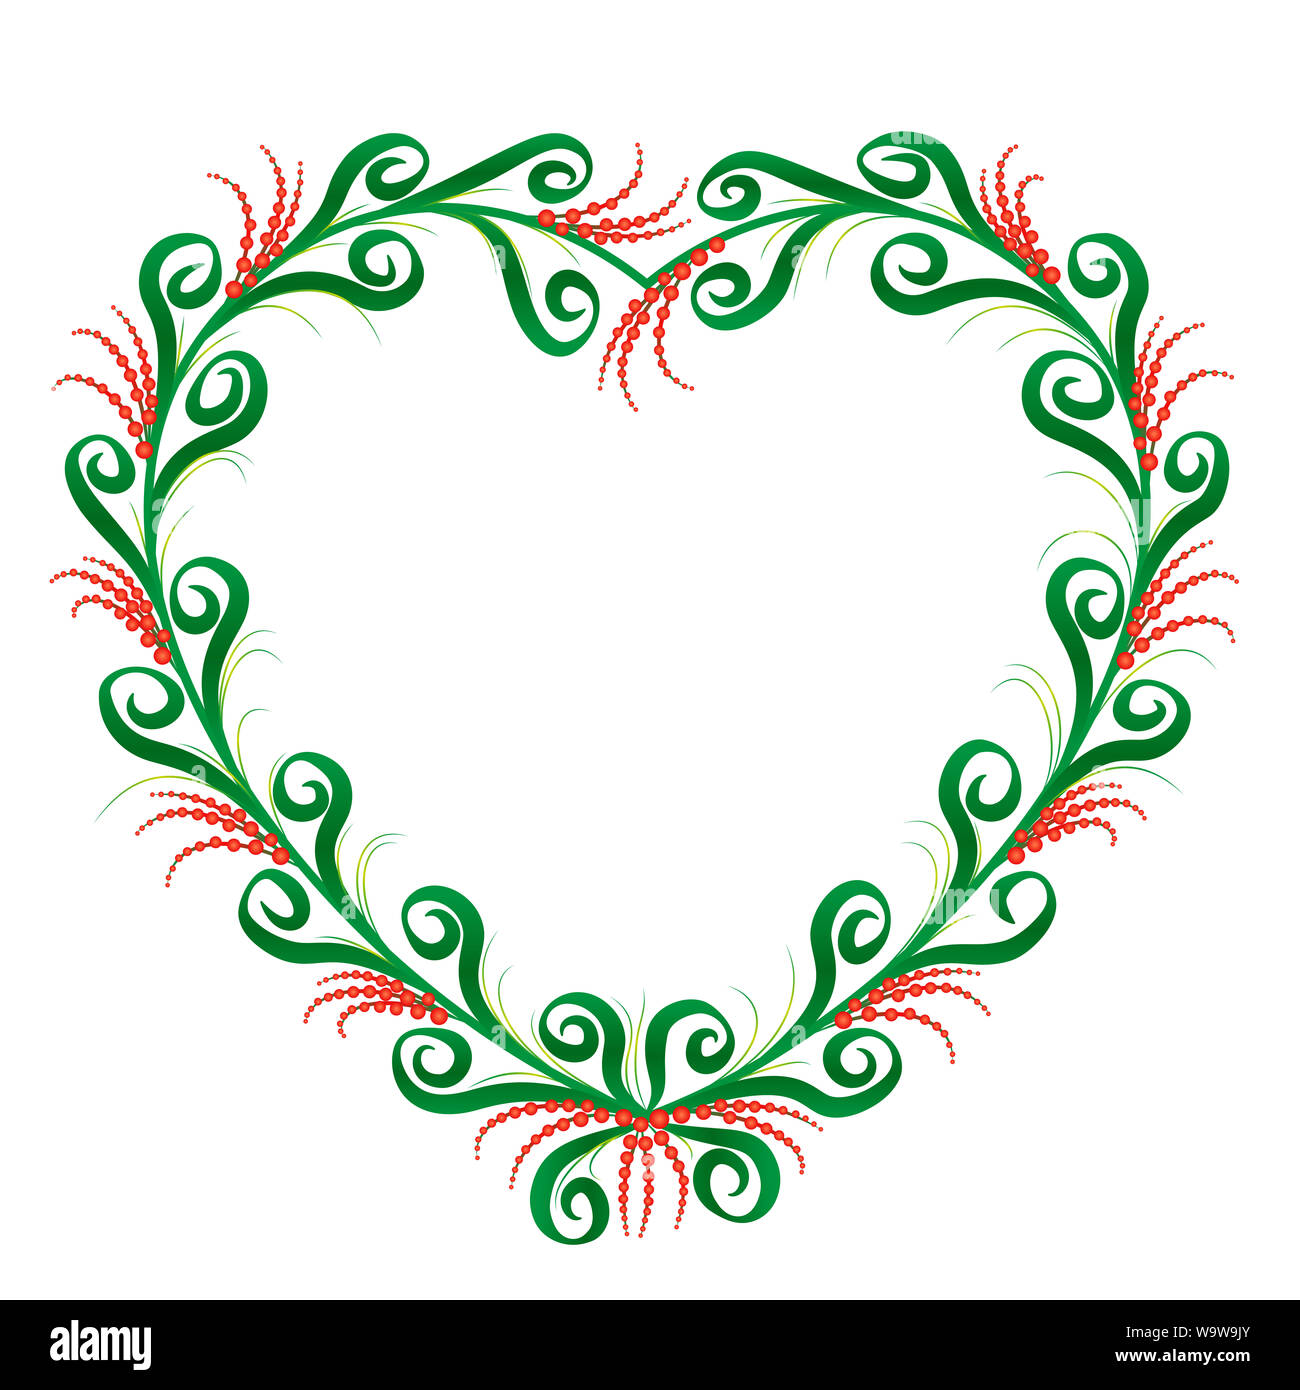 Heart shaped frame, rustic country style. Green and red ornament pattern with graceful and romantic spiral flourishes. Stock Photo